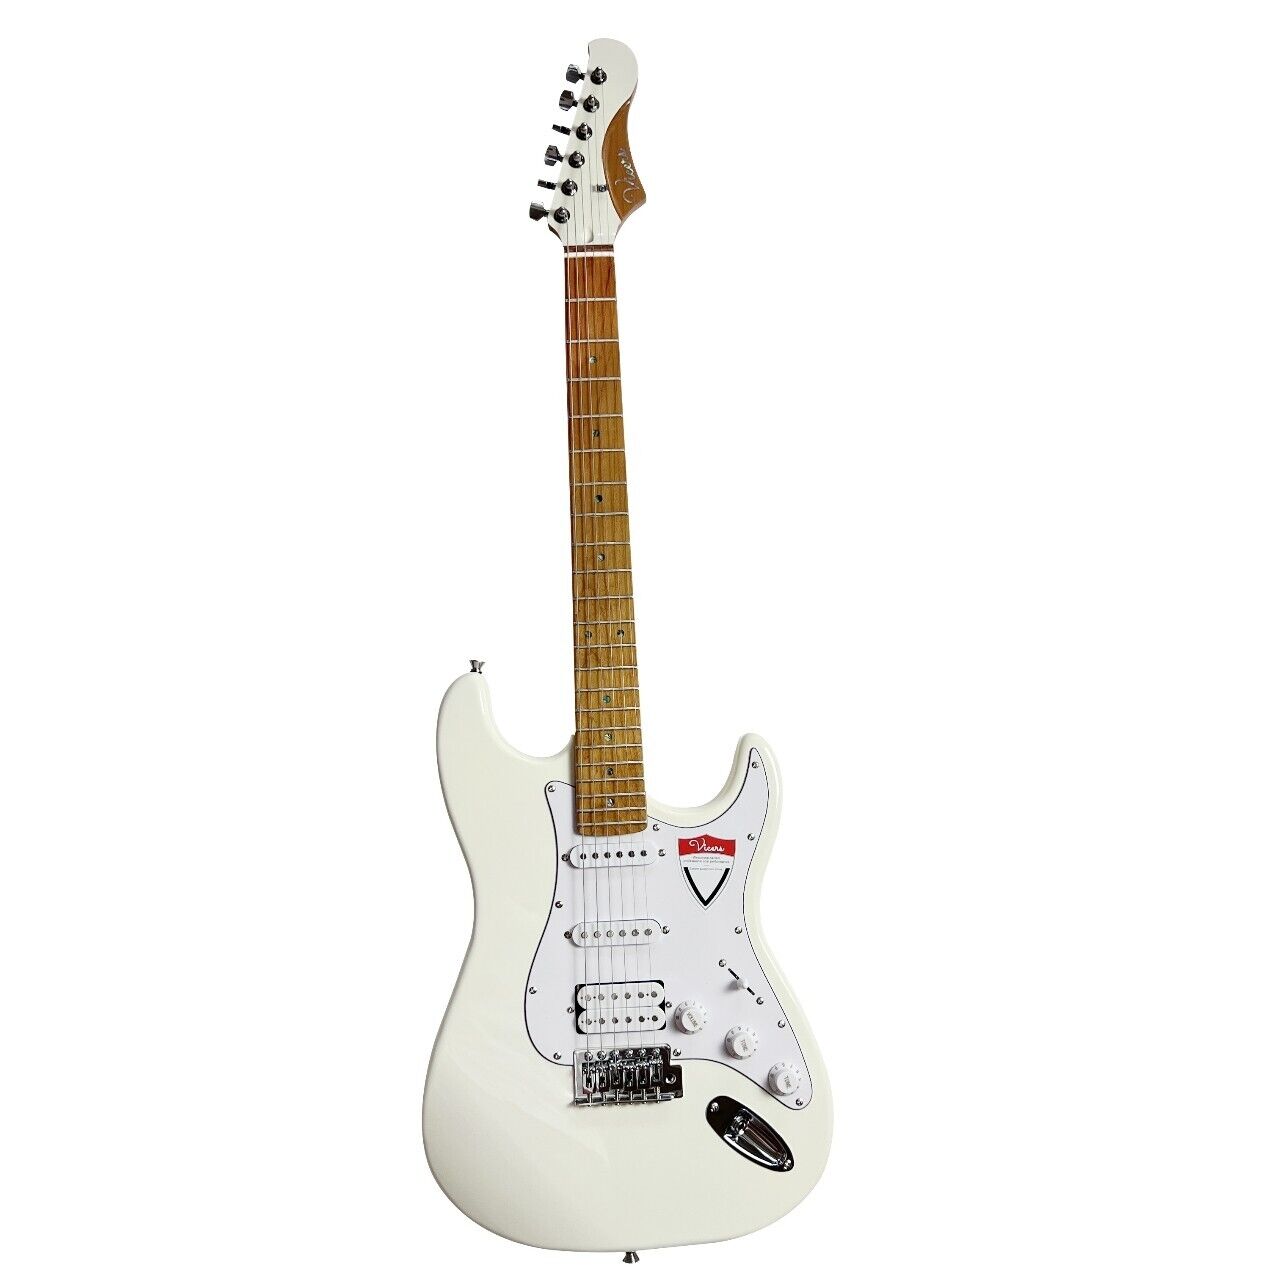 Vicers Custom electric guitar 6 string white High quality Maple fingerboard